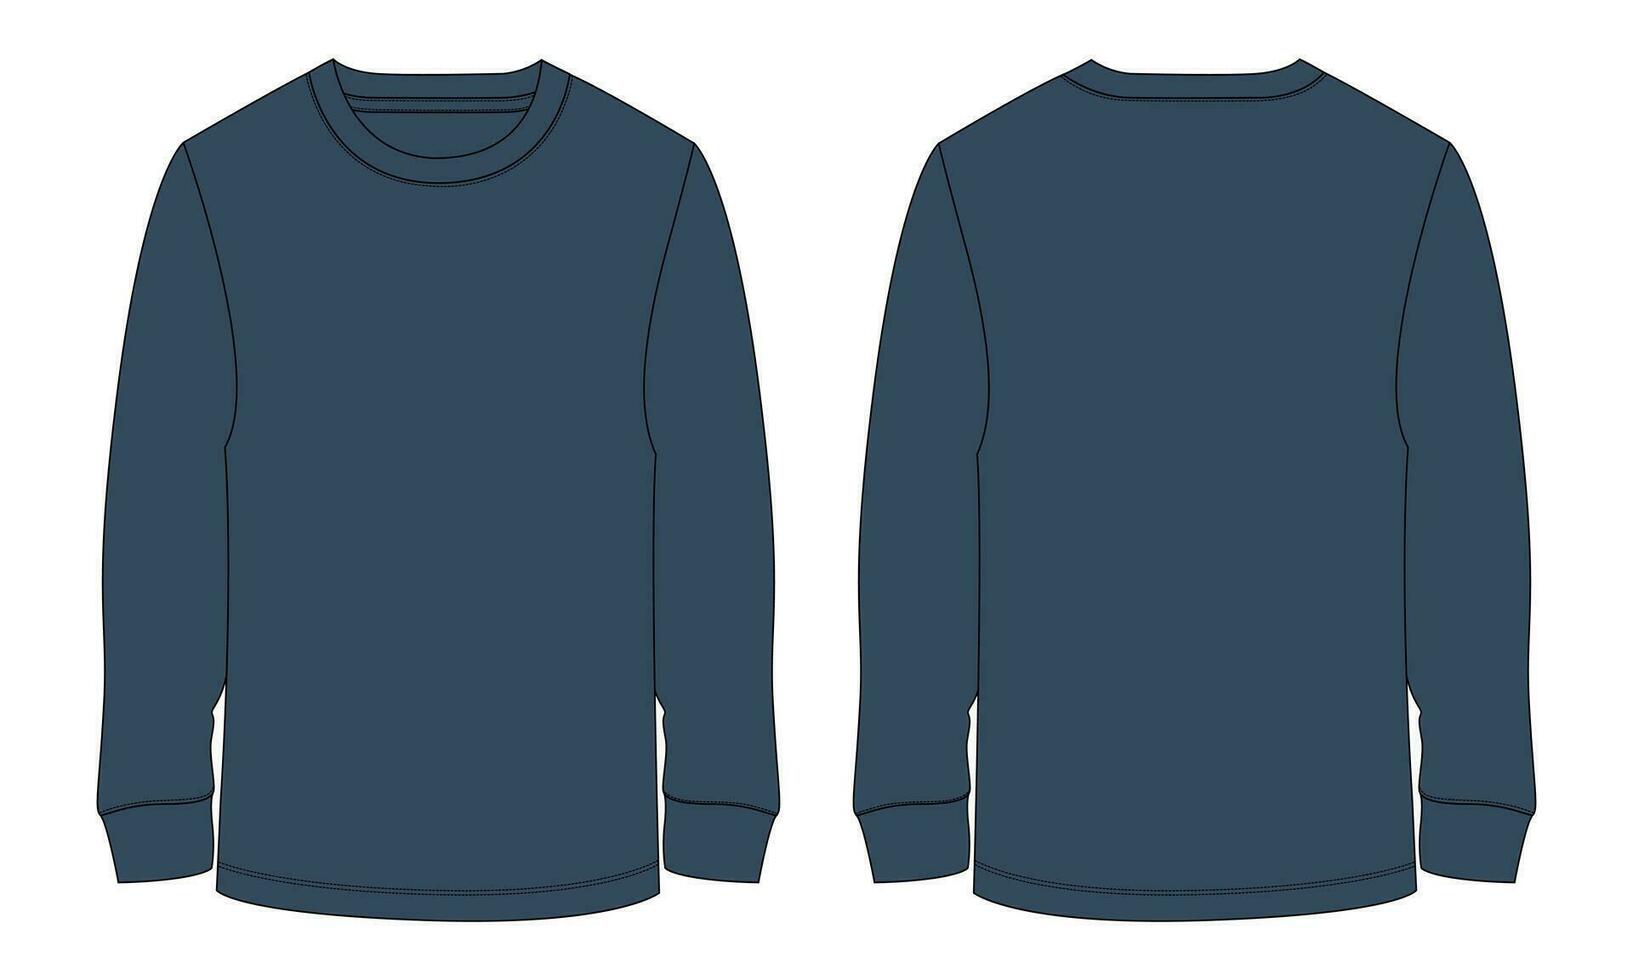 Long sleeve t shirt vector illustration template front and back views